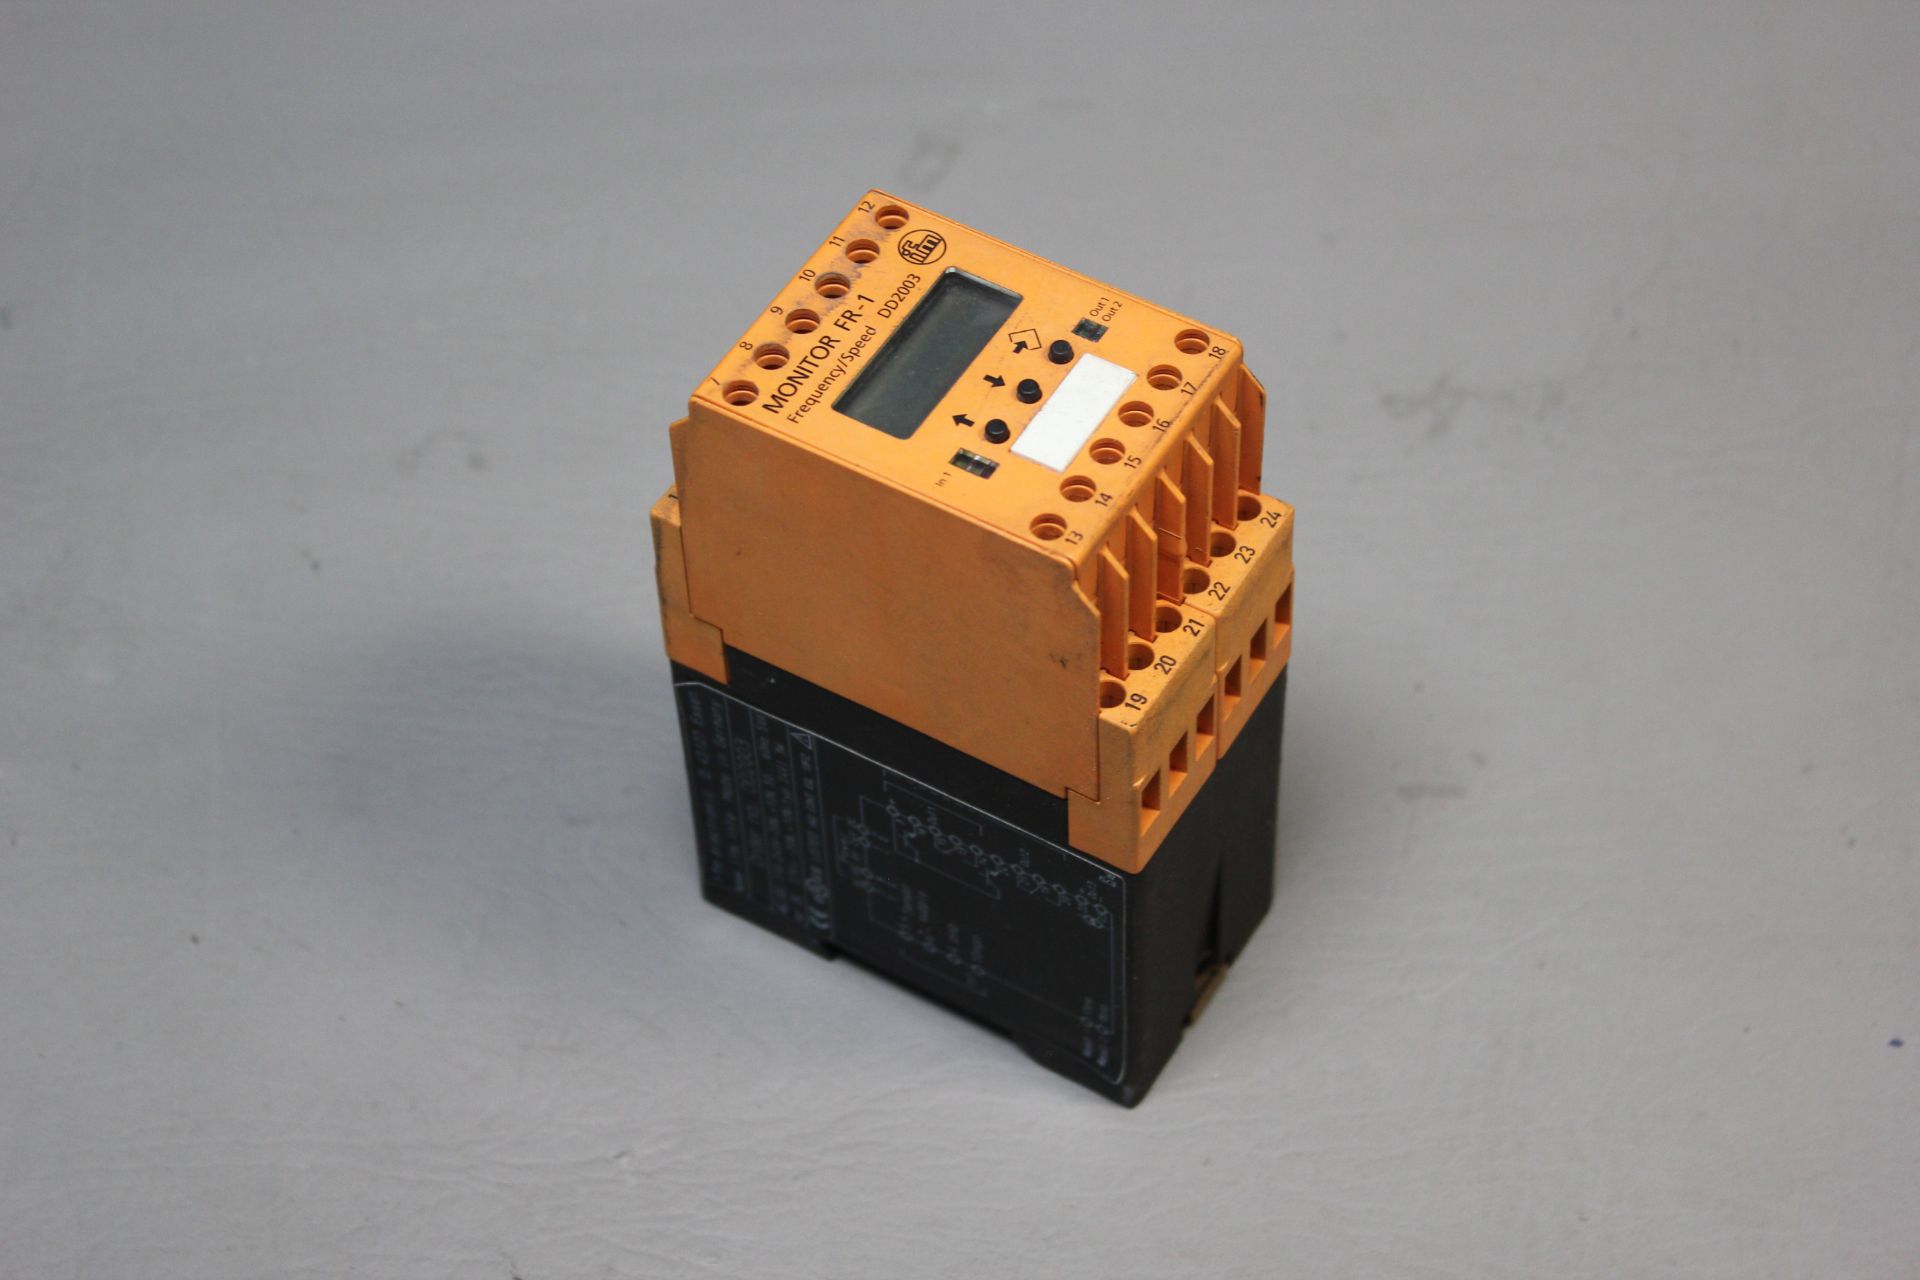 IFM FREQUENCY/SPEED MONITOR